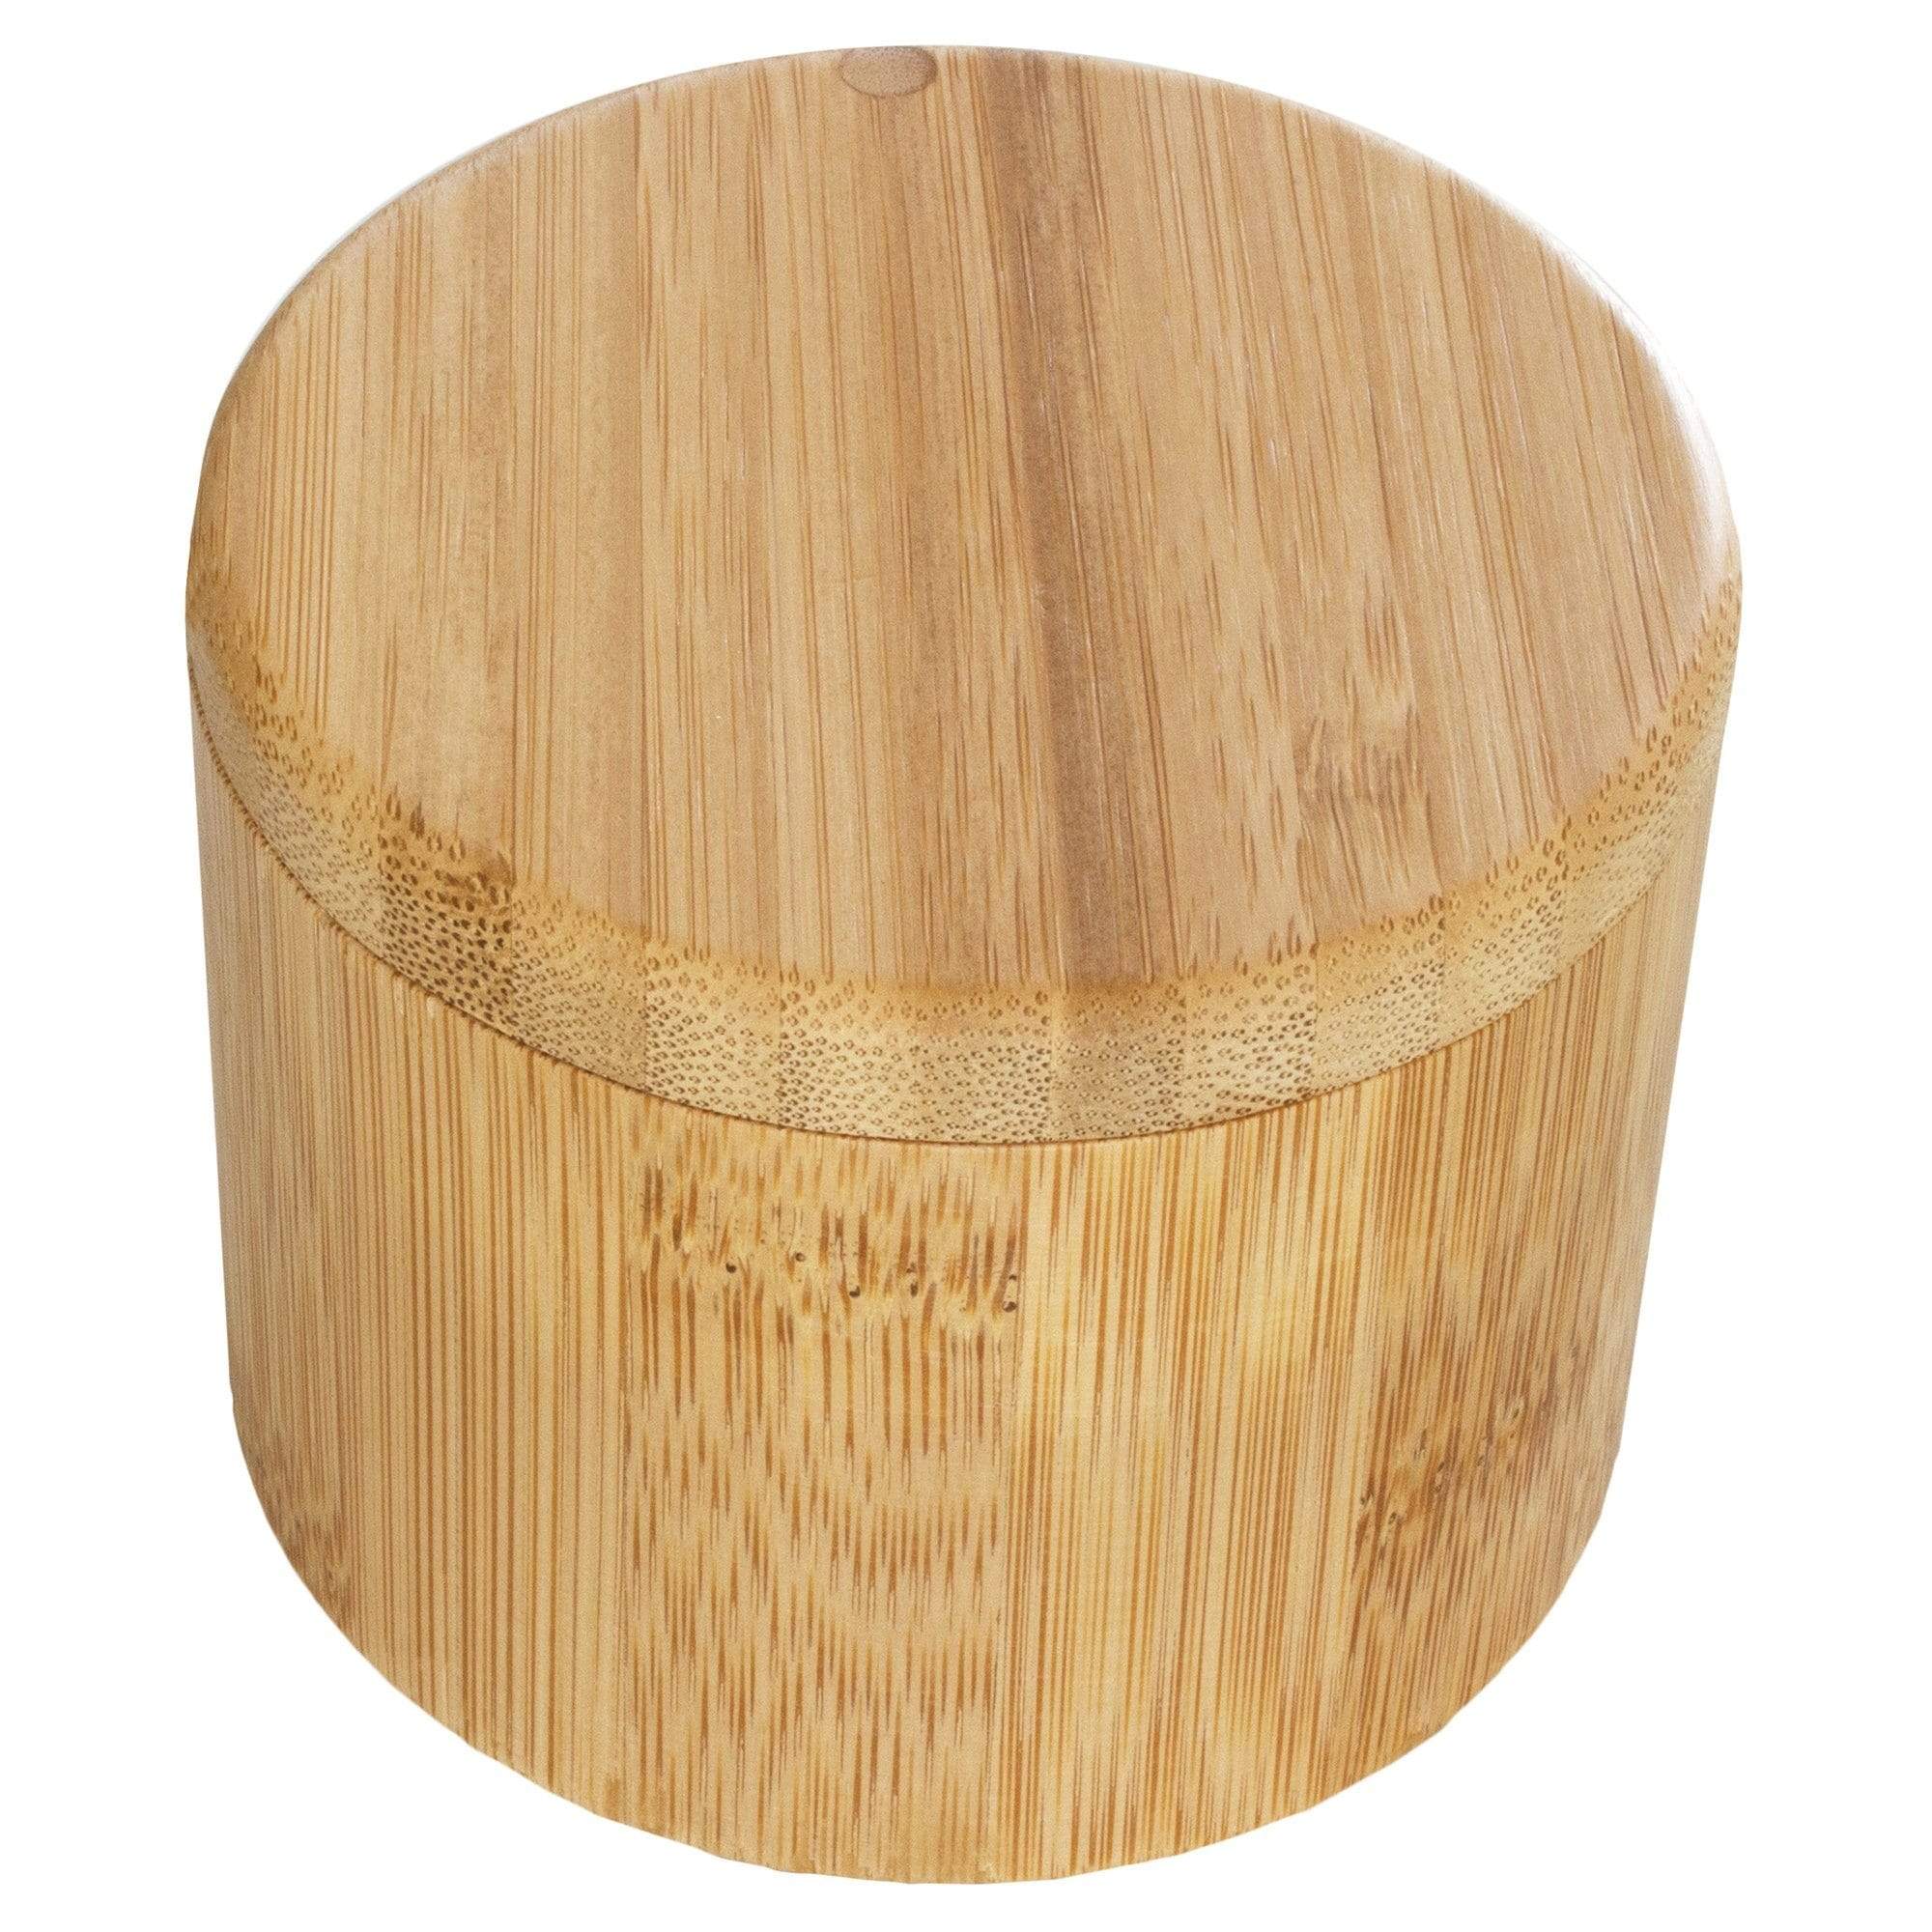 Salt Box with Magnetic Swivel Lid, 6-Oz. Capacity – Totally Bamboo